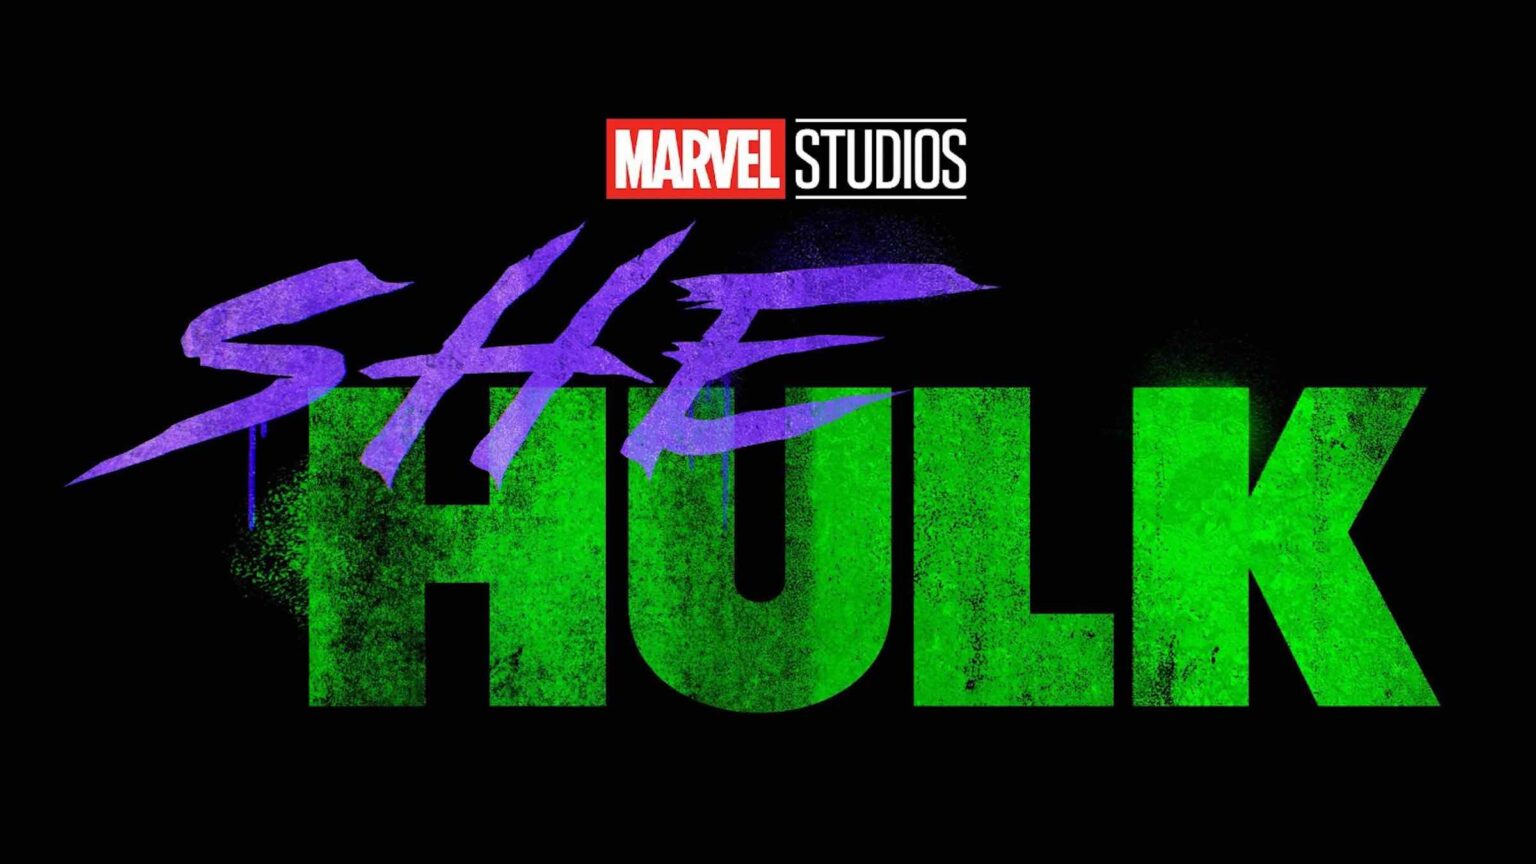 Marvel’s 'She-Hulk' announced the casting of Jameela Jamil as the villain Titania. Get ready to Hulk out and dive into the latest about Marvel’s 'She-Hulk'. 